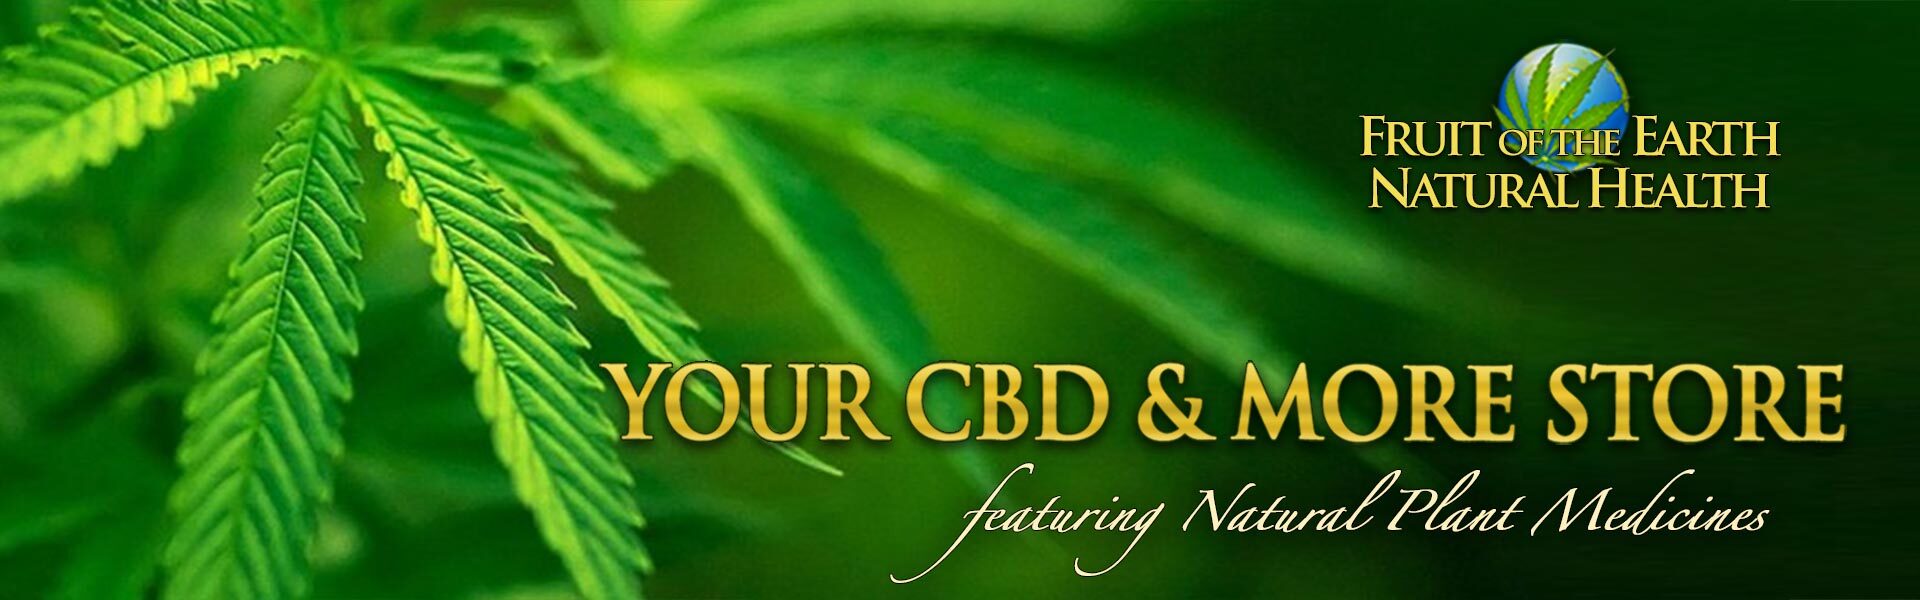 CBD and More Store